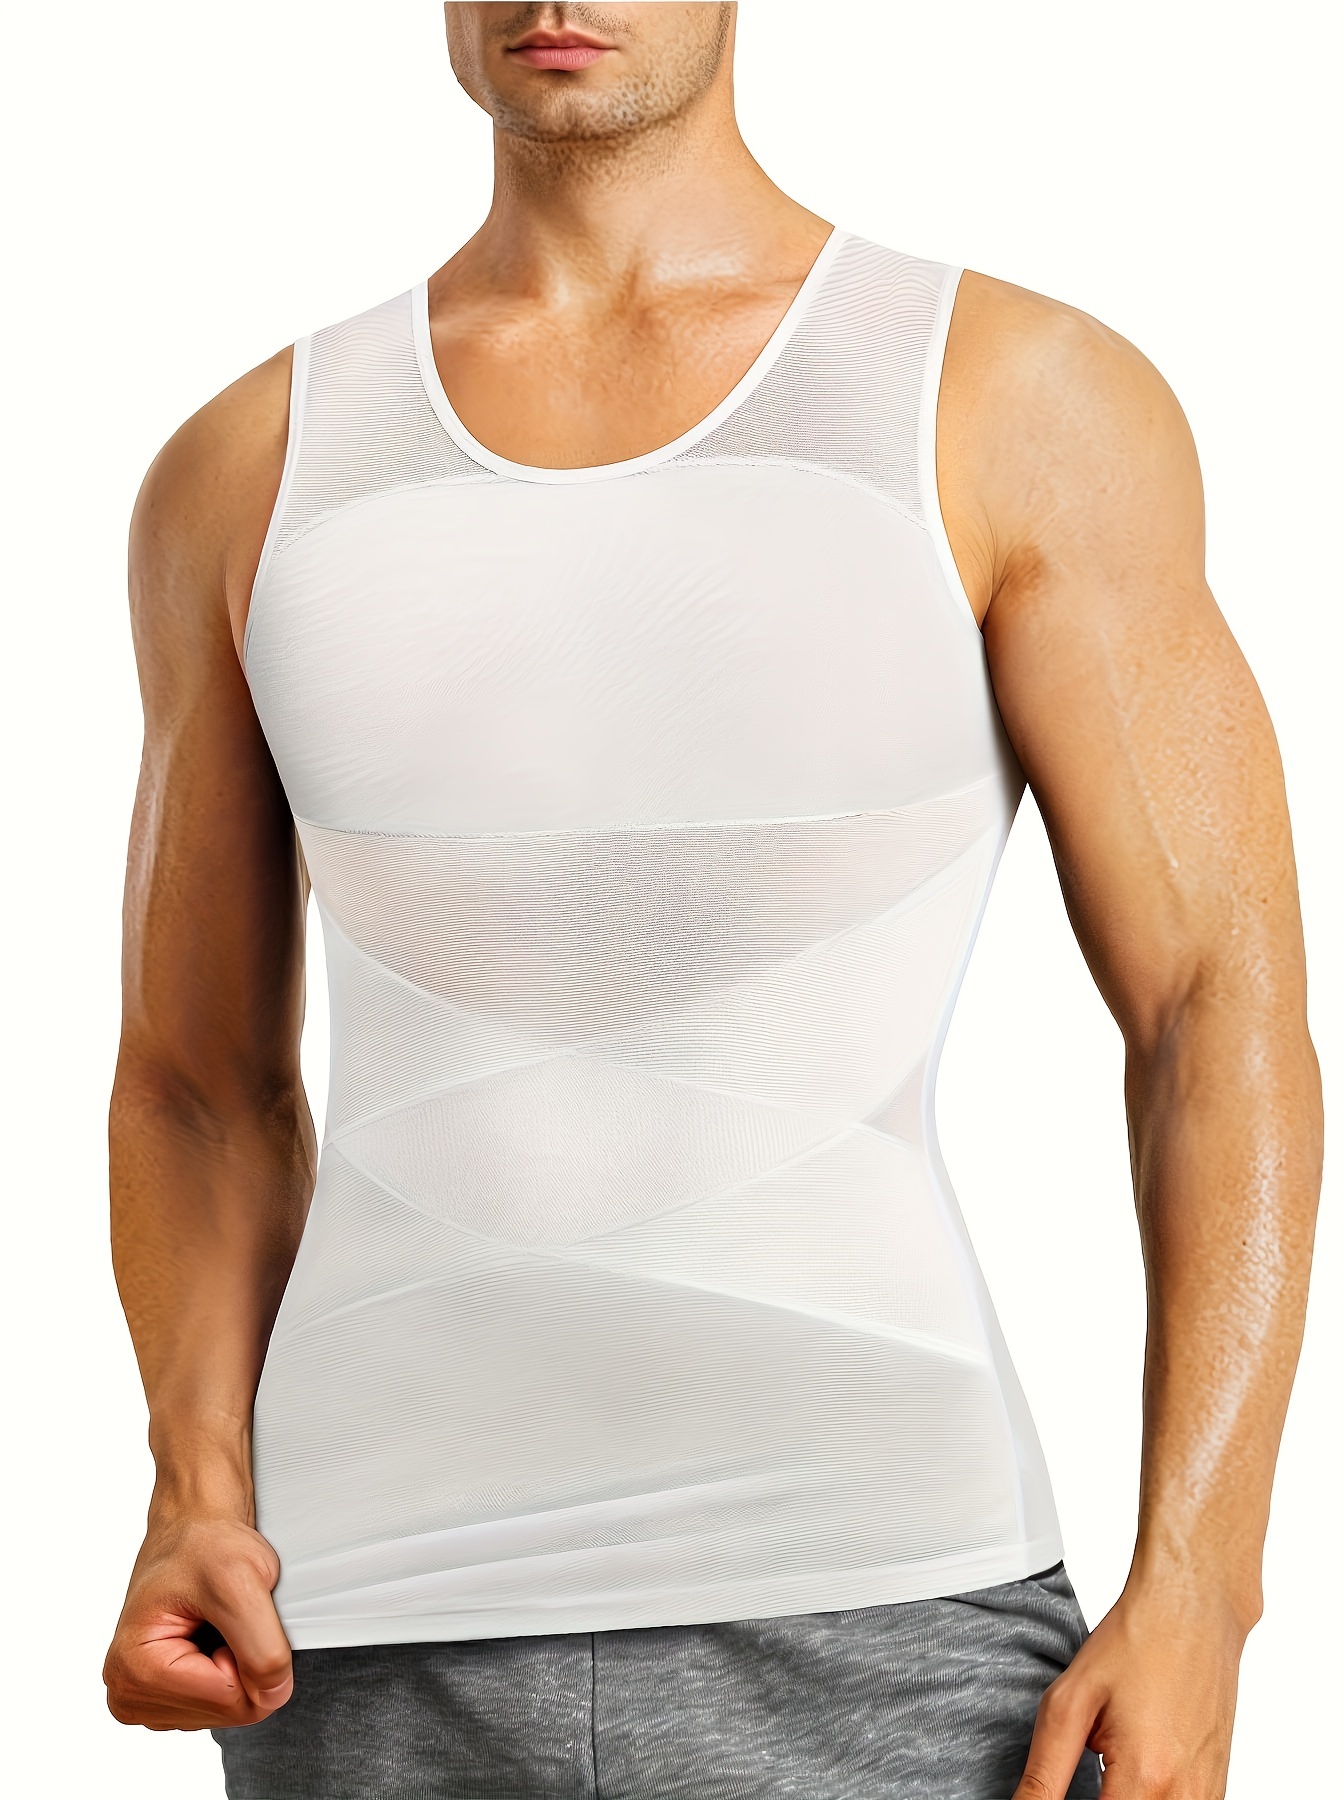 NEW IN - White perforated vest / undershirt (2pcs)